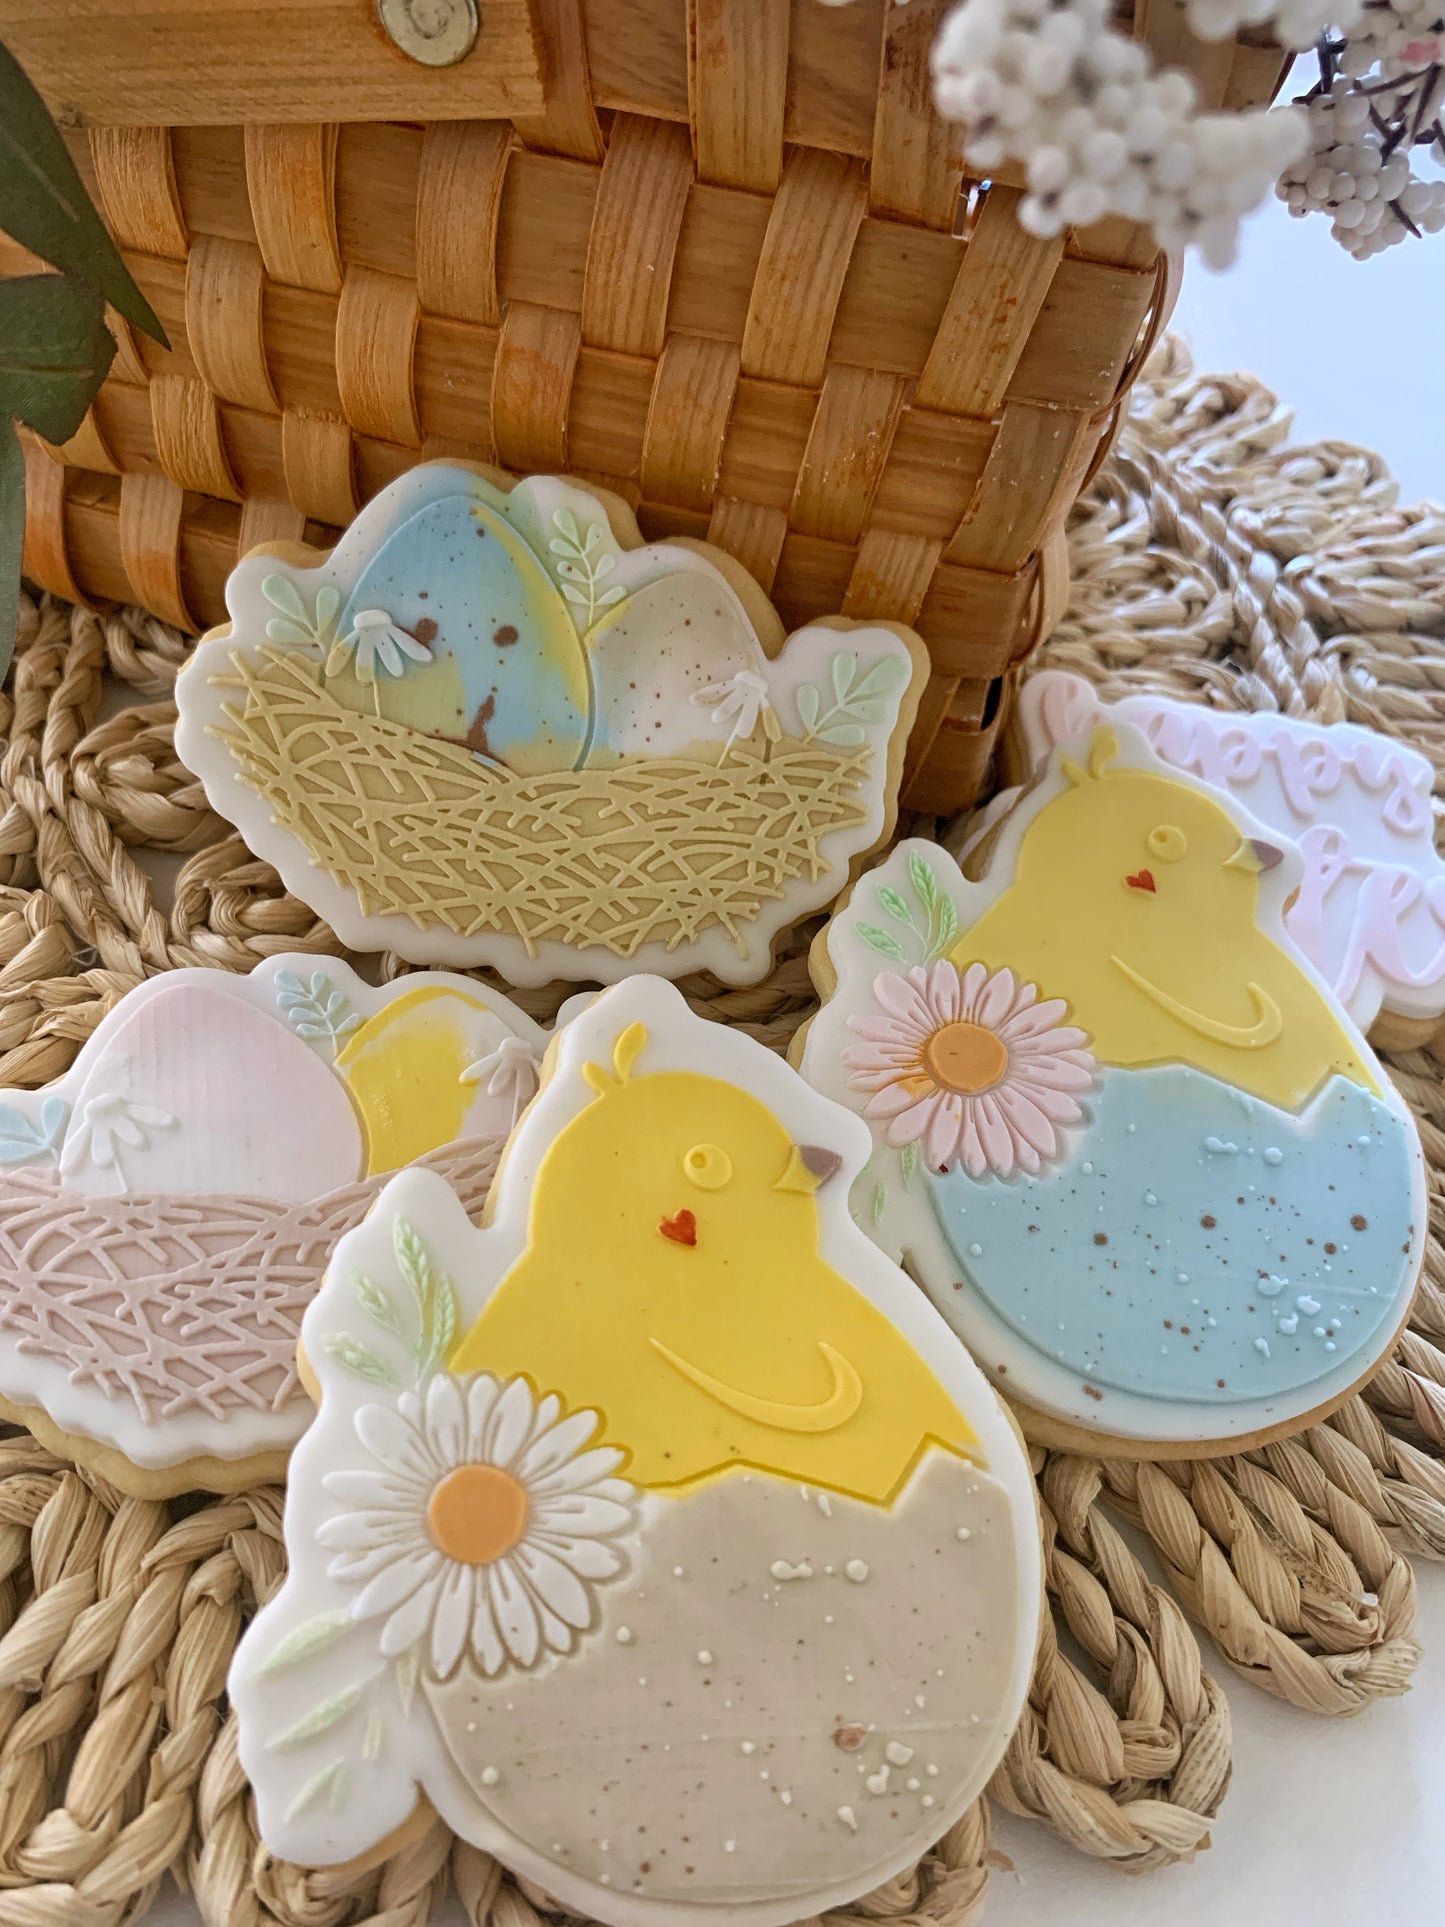 Hatching Chick Cookie Stamp and Cutter